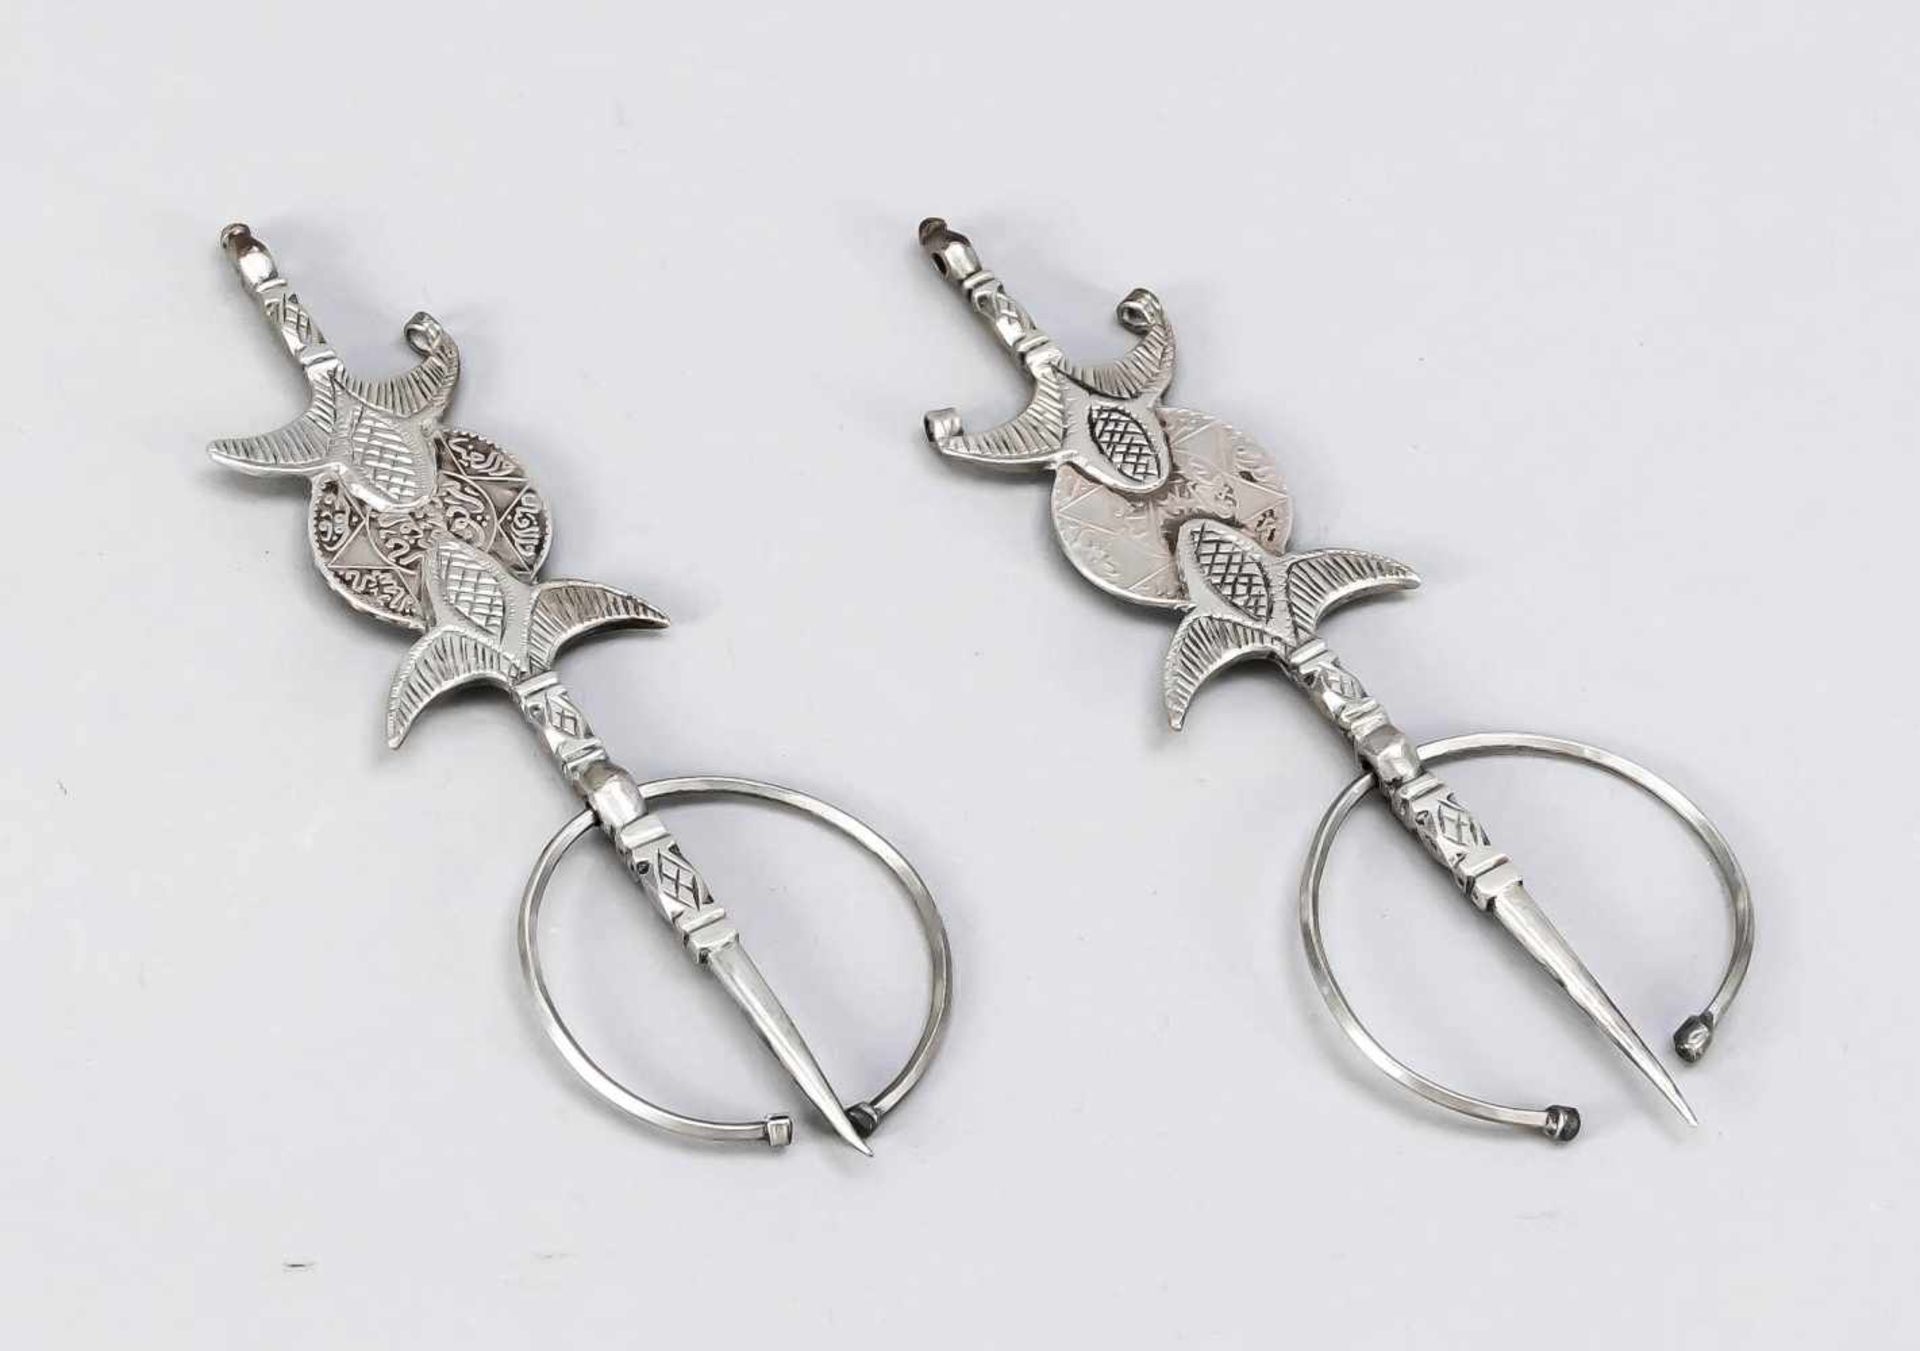 Pair of large fevers, Morocco, 1st third of the 20th century, silver. Bordered by 2 flower